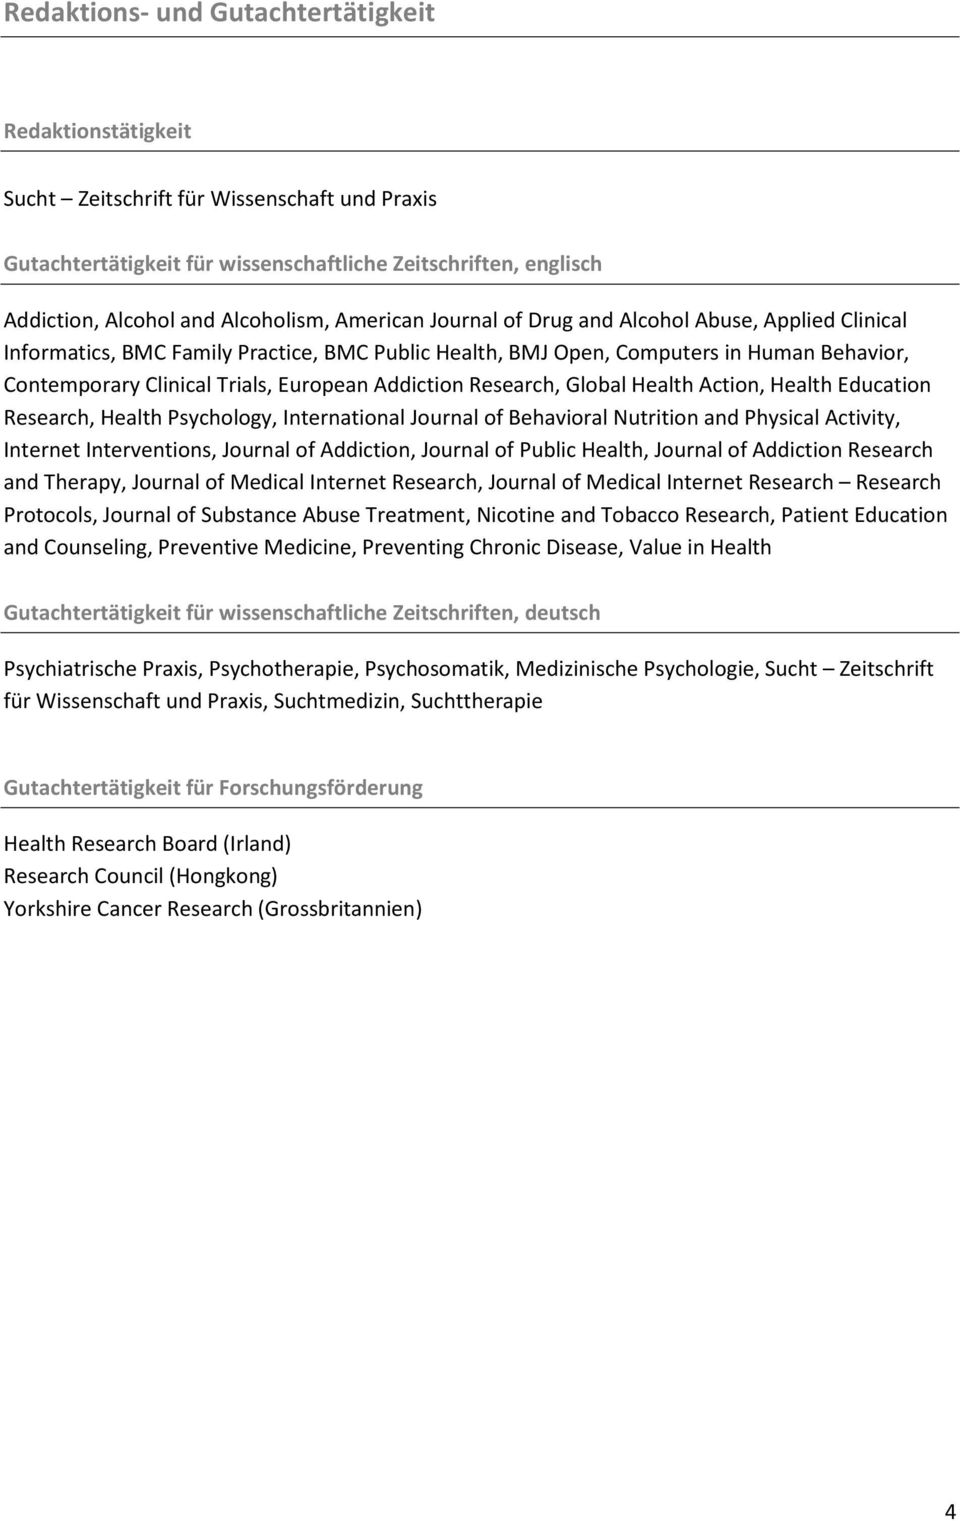 European Addiction Research, Global Health Action, Health Education Research, Health Psychology, International Journal of Behavioral Nutrition and Physical Activity, Internet Interventions, Journal